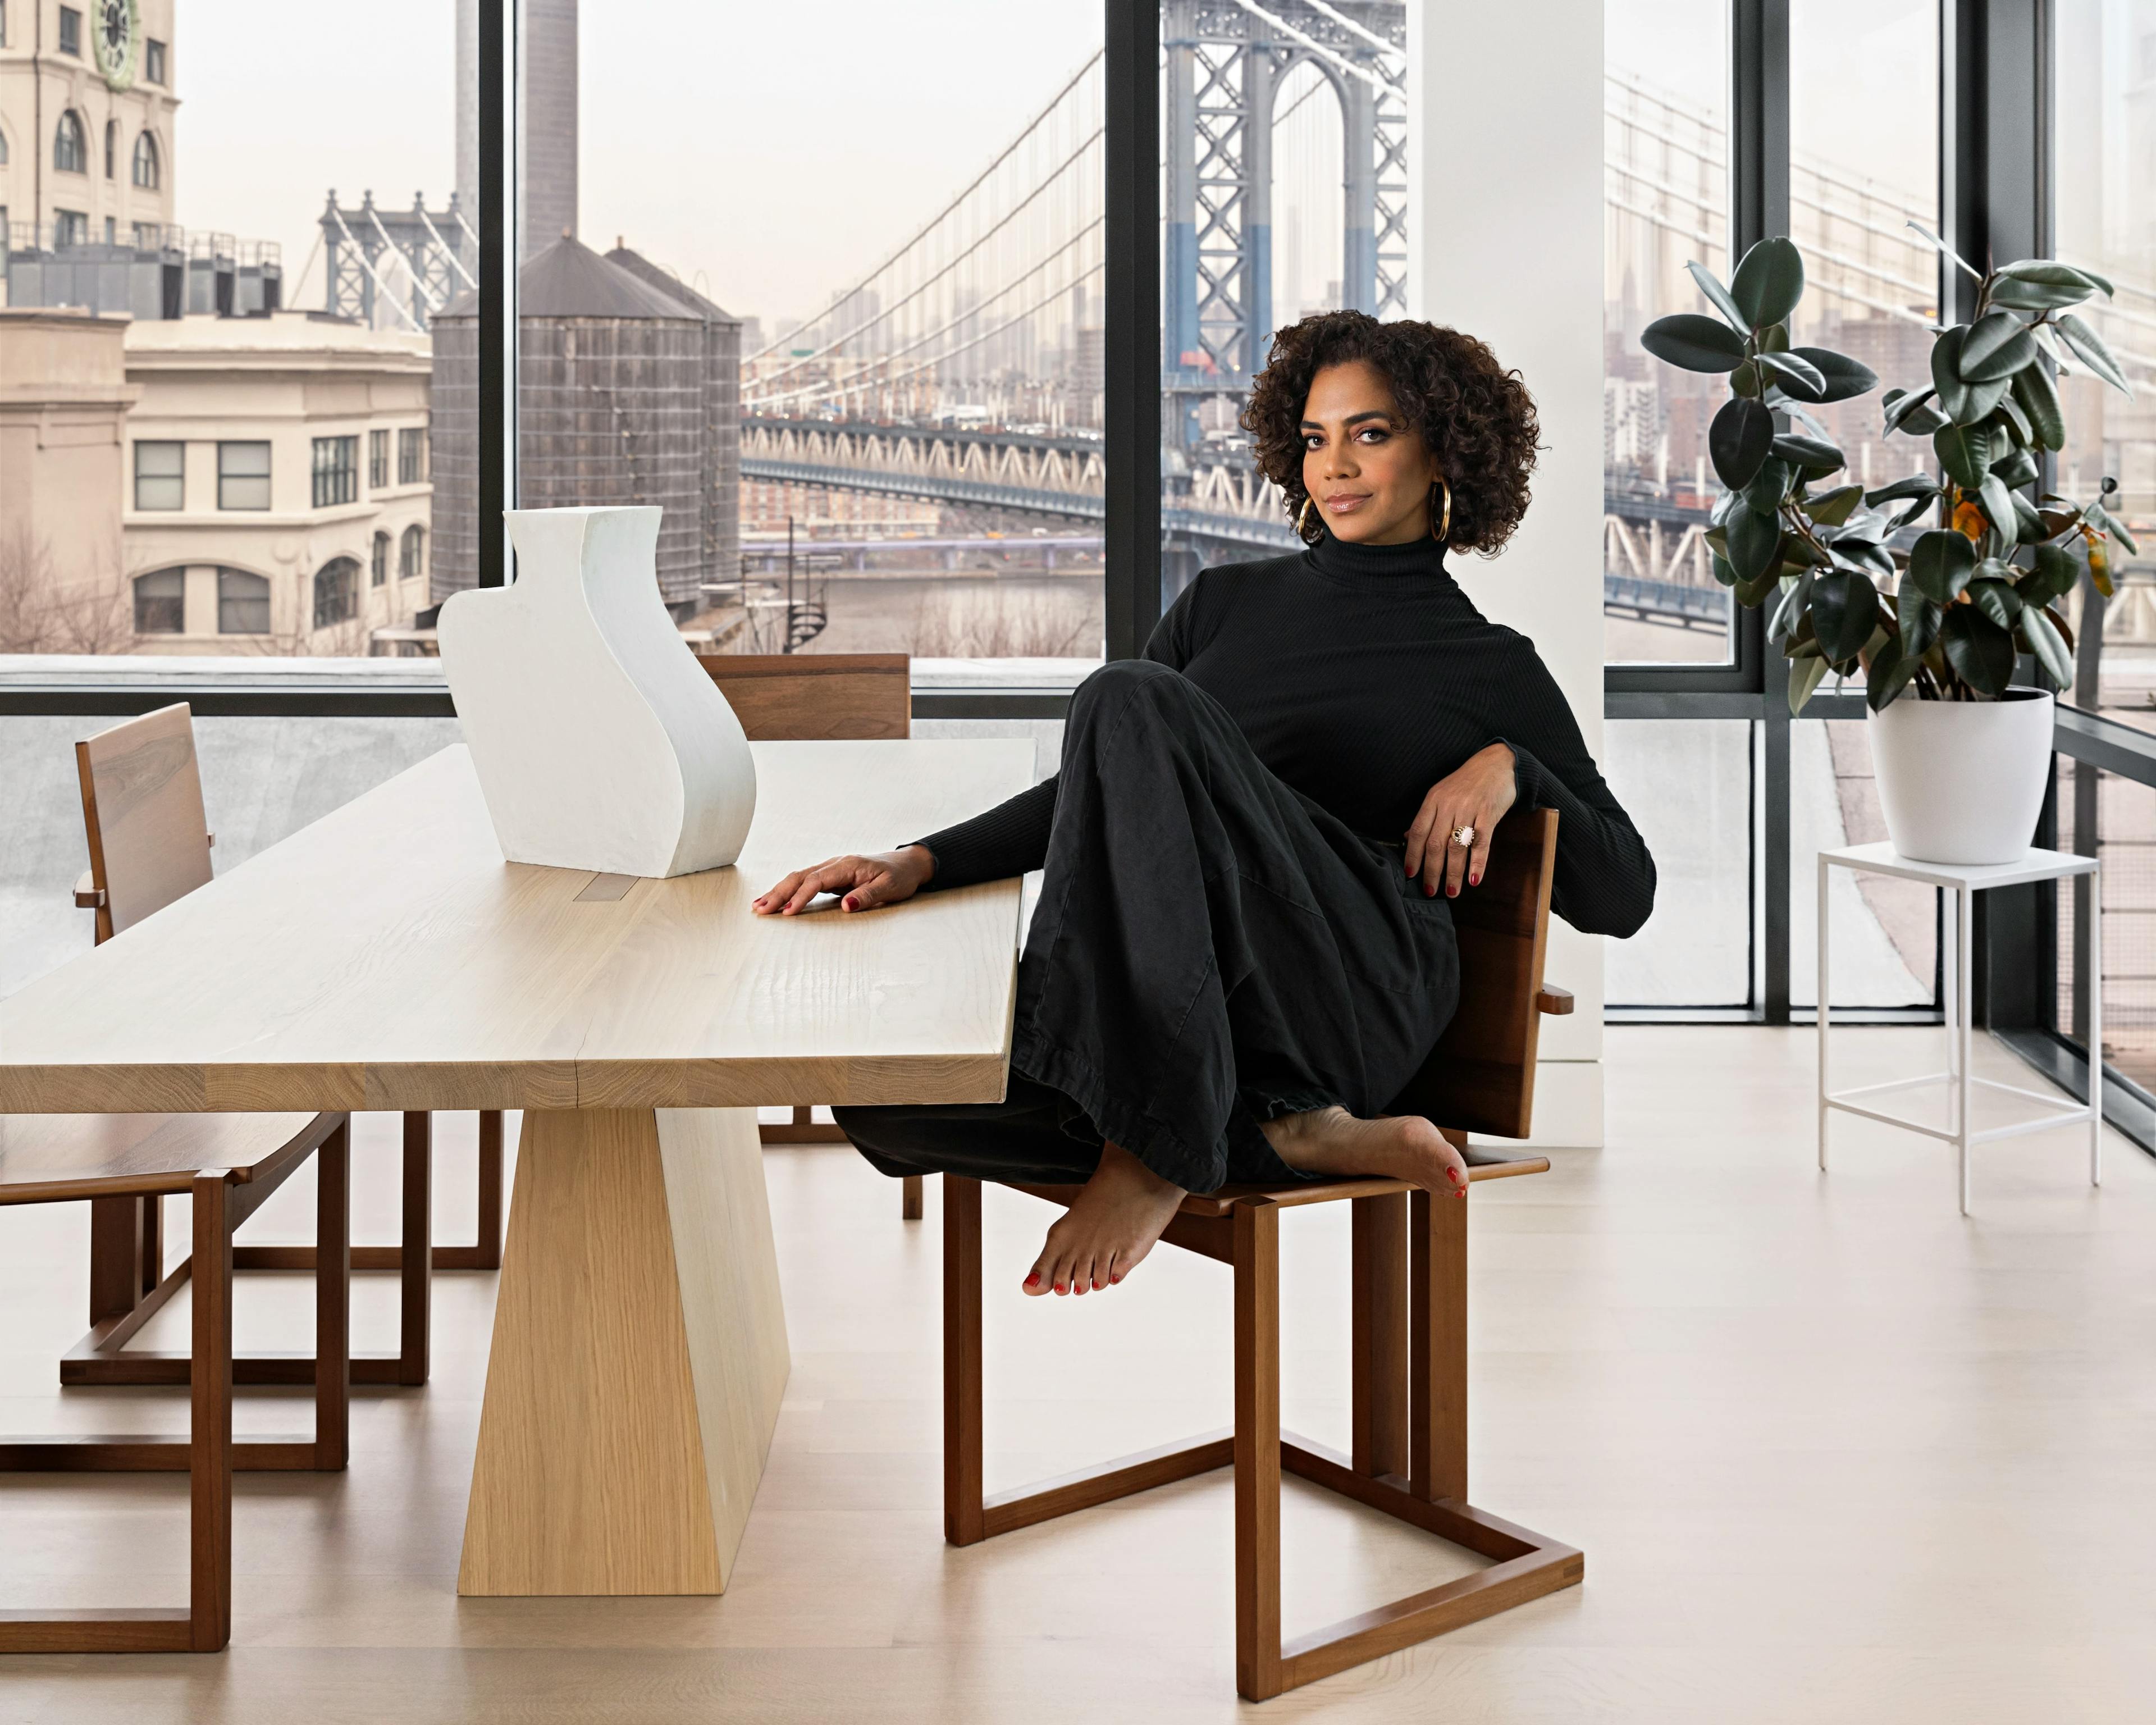 Designer Danielle Colding wearing a black turtleneck and pants, sitting at a wooden table with a white sculpture by artist Dan Covert on top.